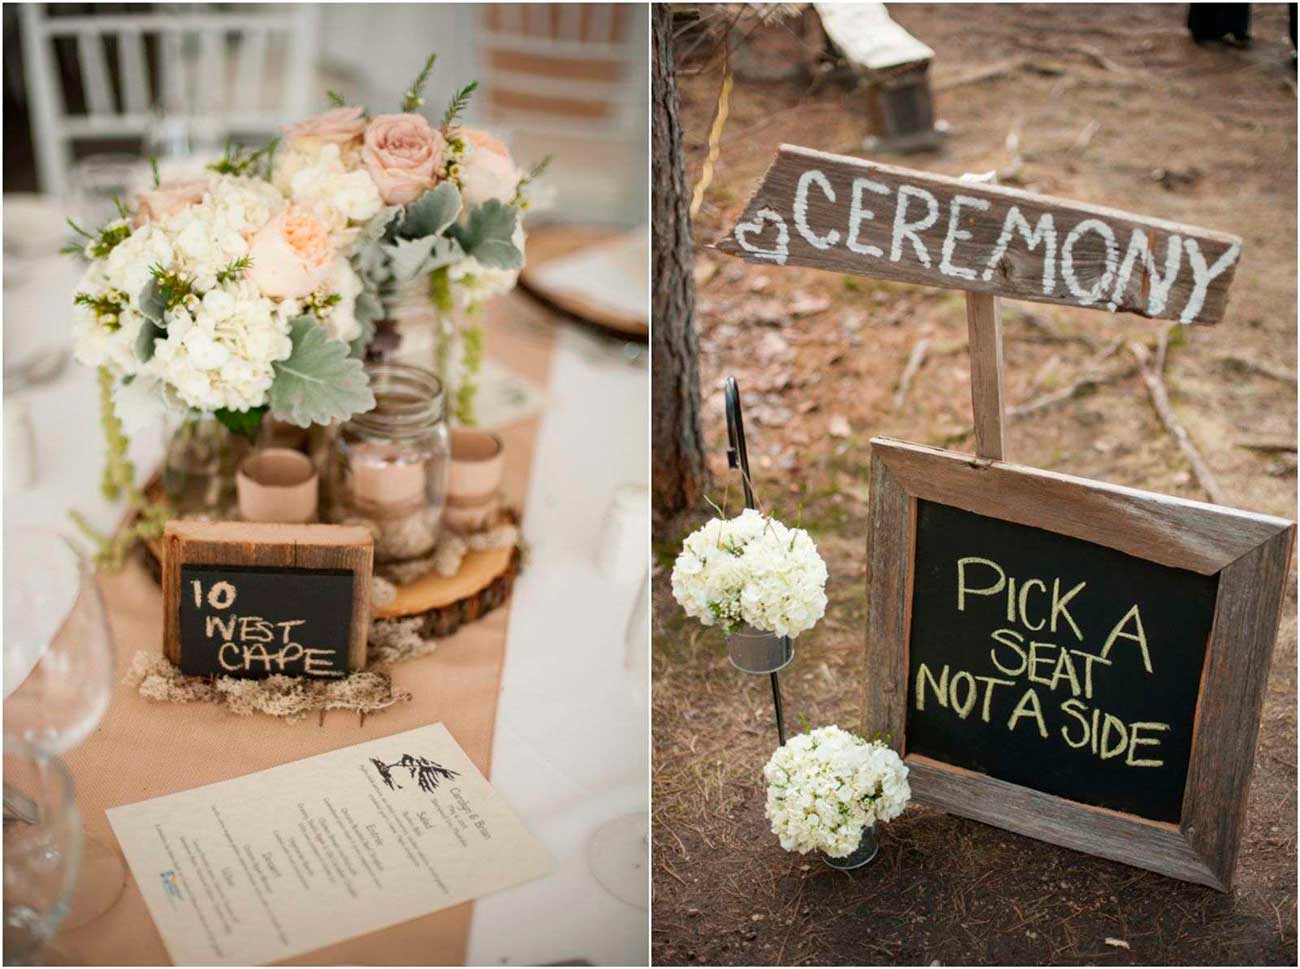 Simple-country-wedding-decorations-chalkboard